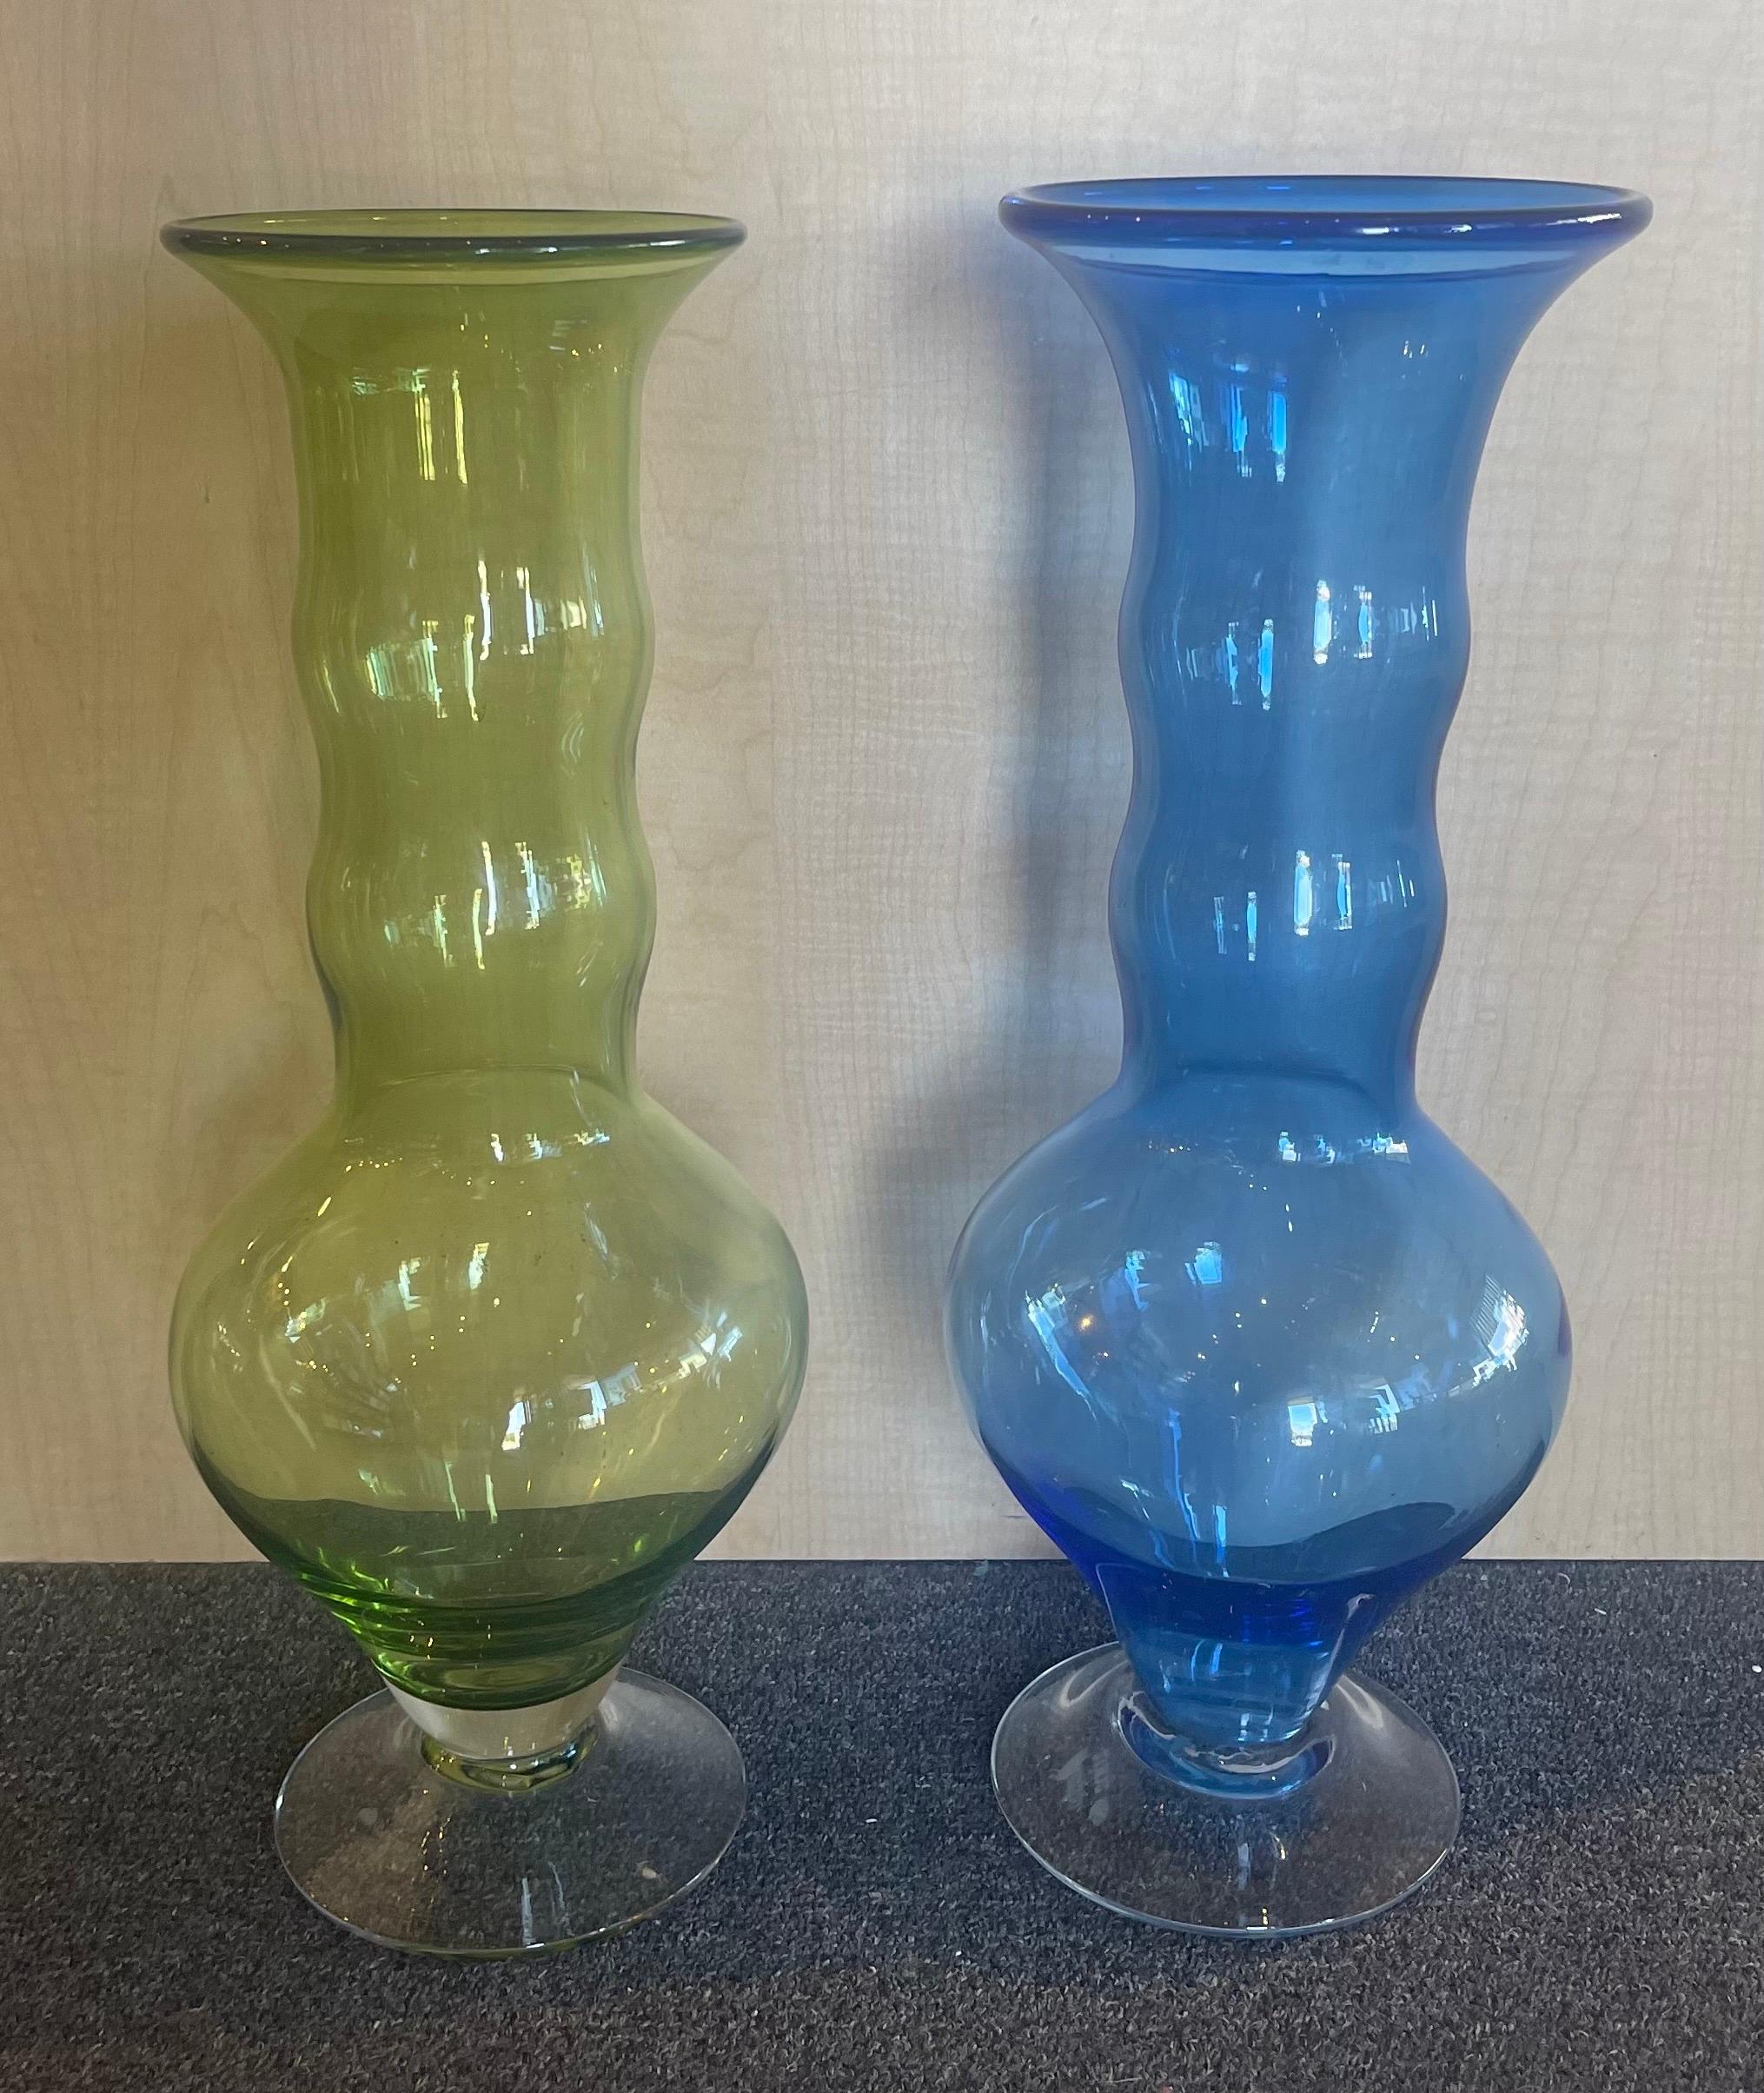 A very cool hand blown art glass vase by Matt Carter for Blenko Glass, circa 2002. The vases are in very good vintage condition with no chips or cracks and measure 6.5